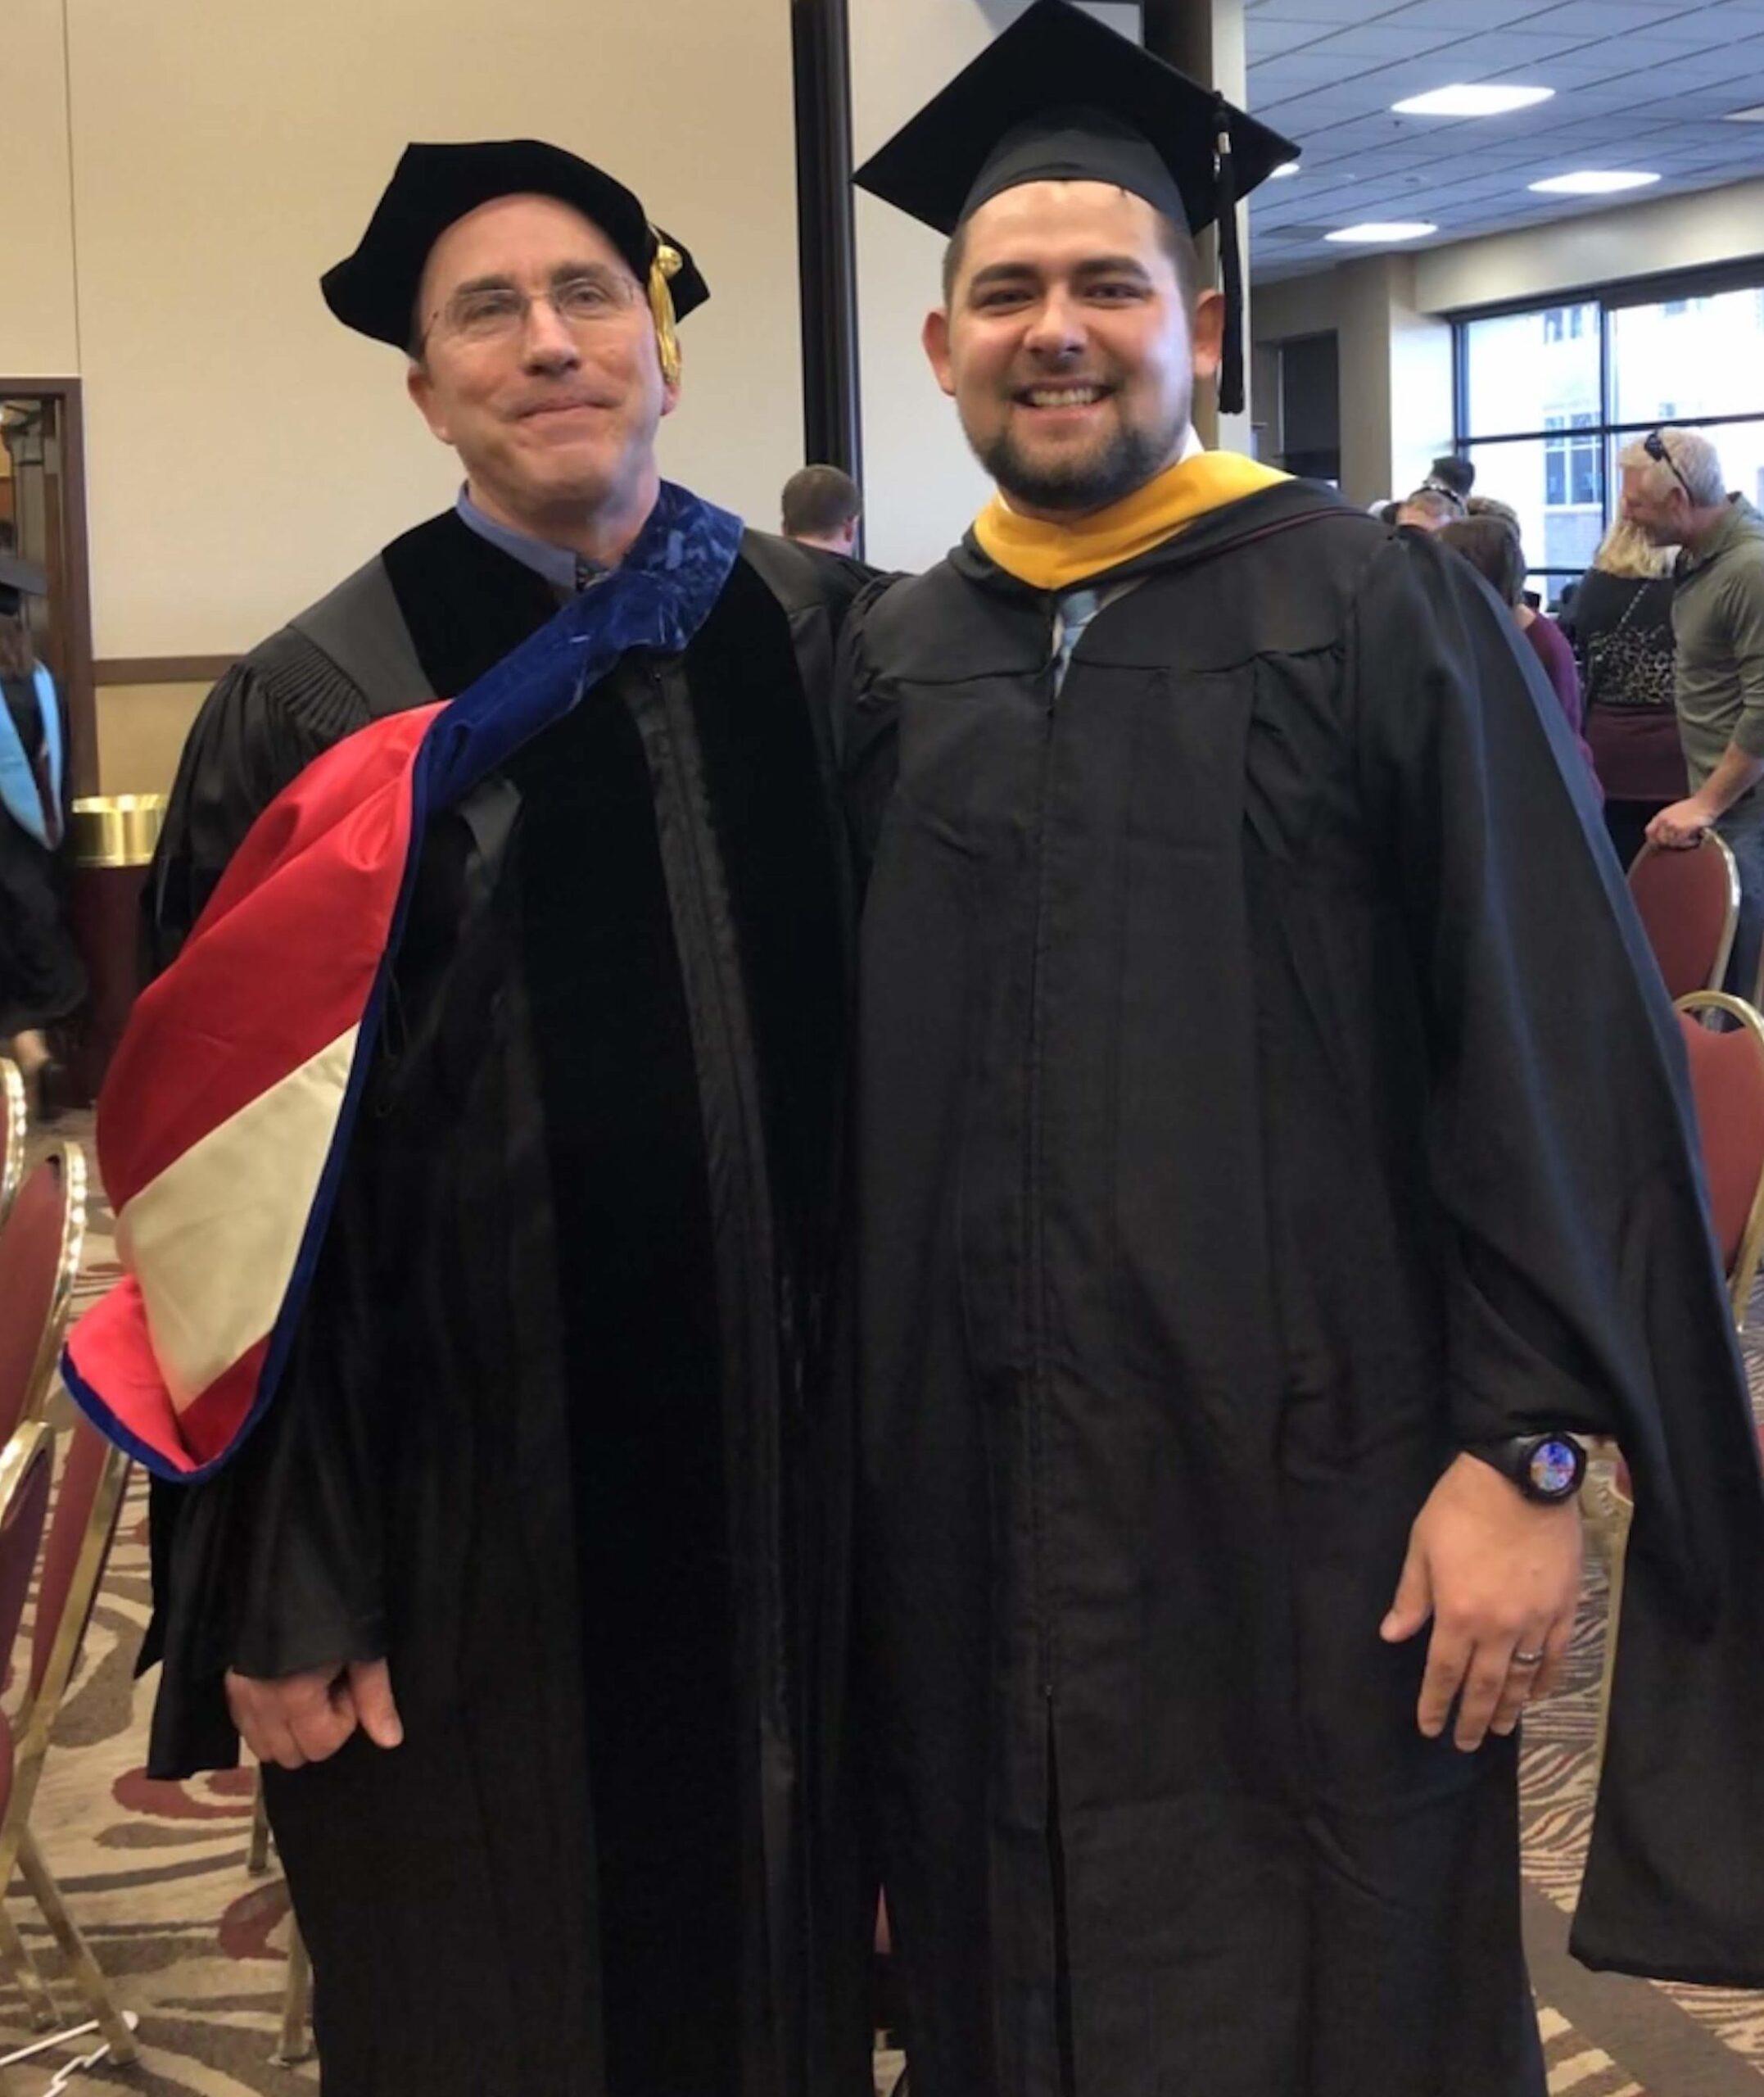 Lucas with Dr. Jeffrey Baggett at graduation in December 2018.